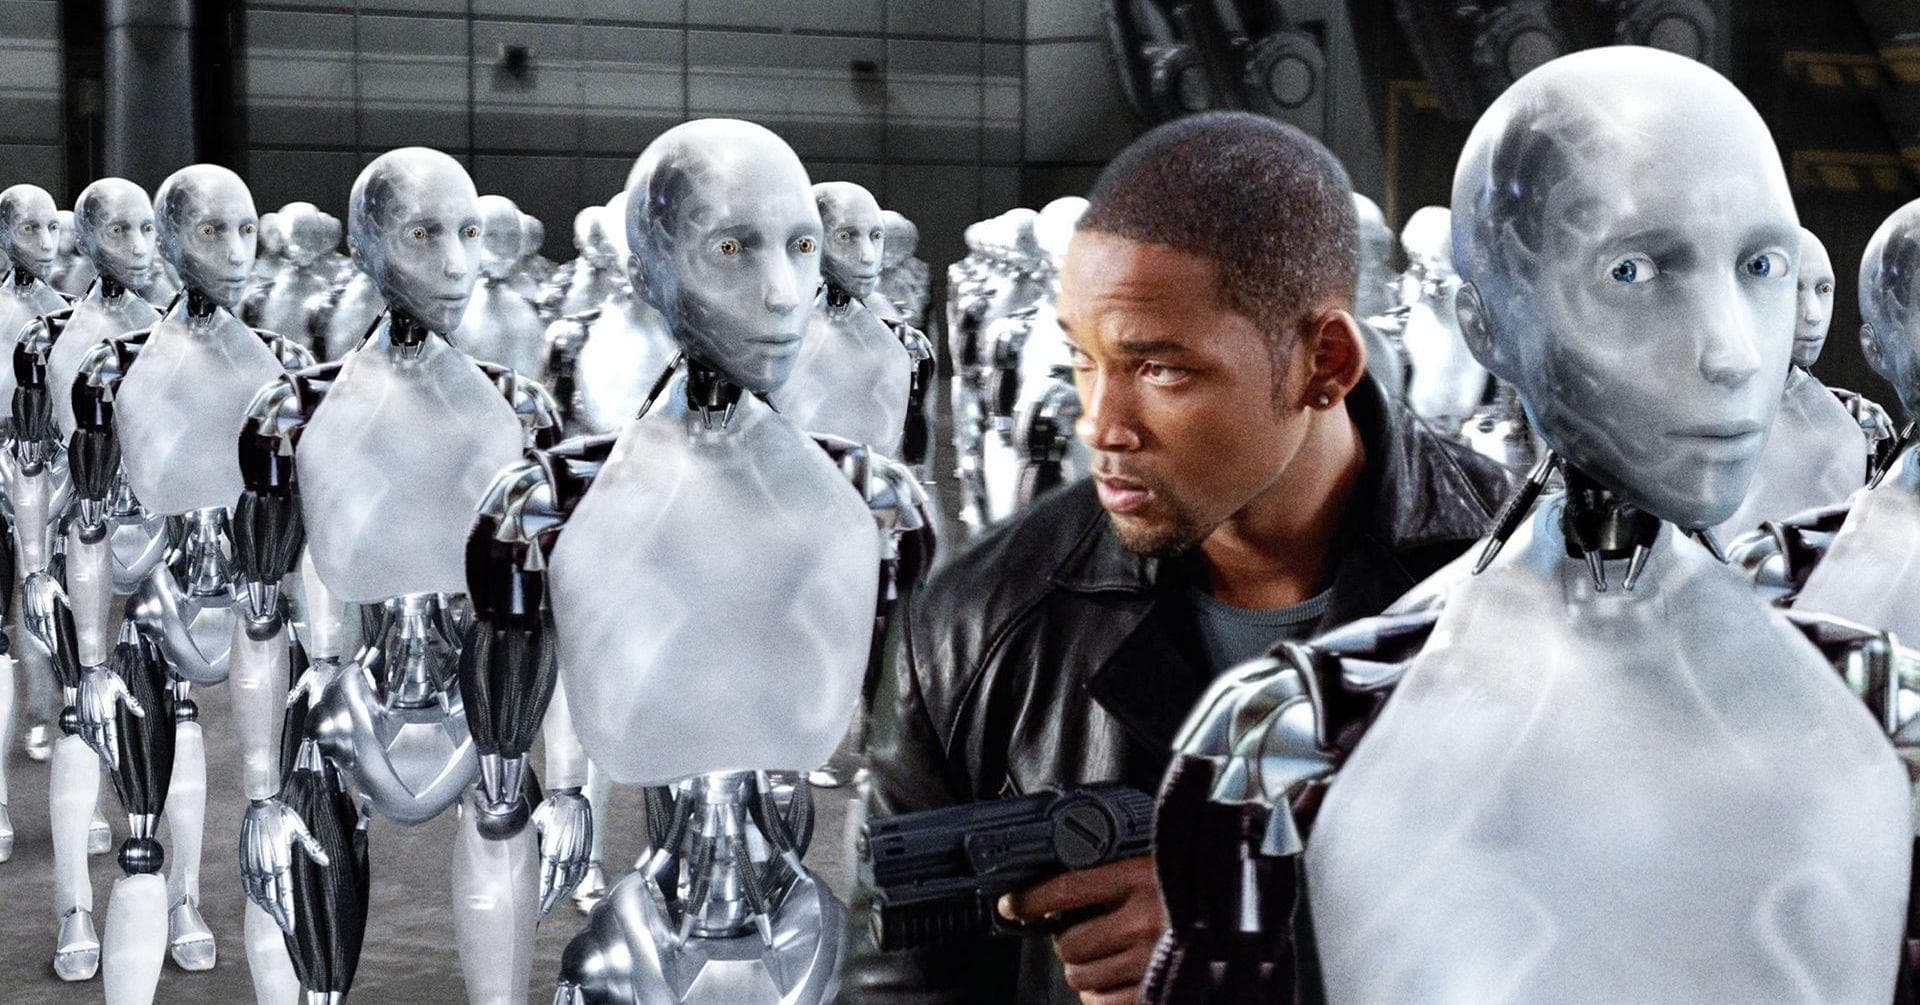 18 Details Fans Noticed In Robot Movies That We Definitely Missed